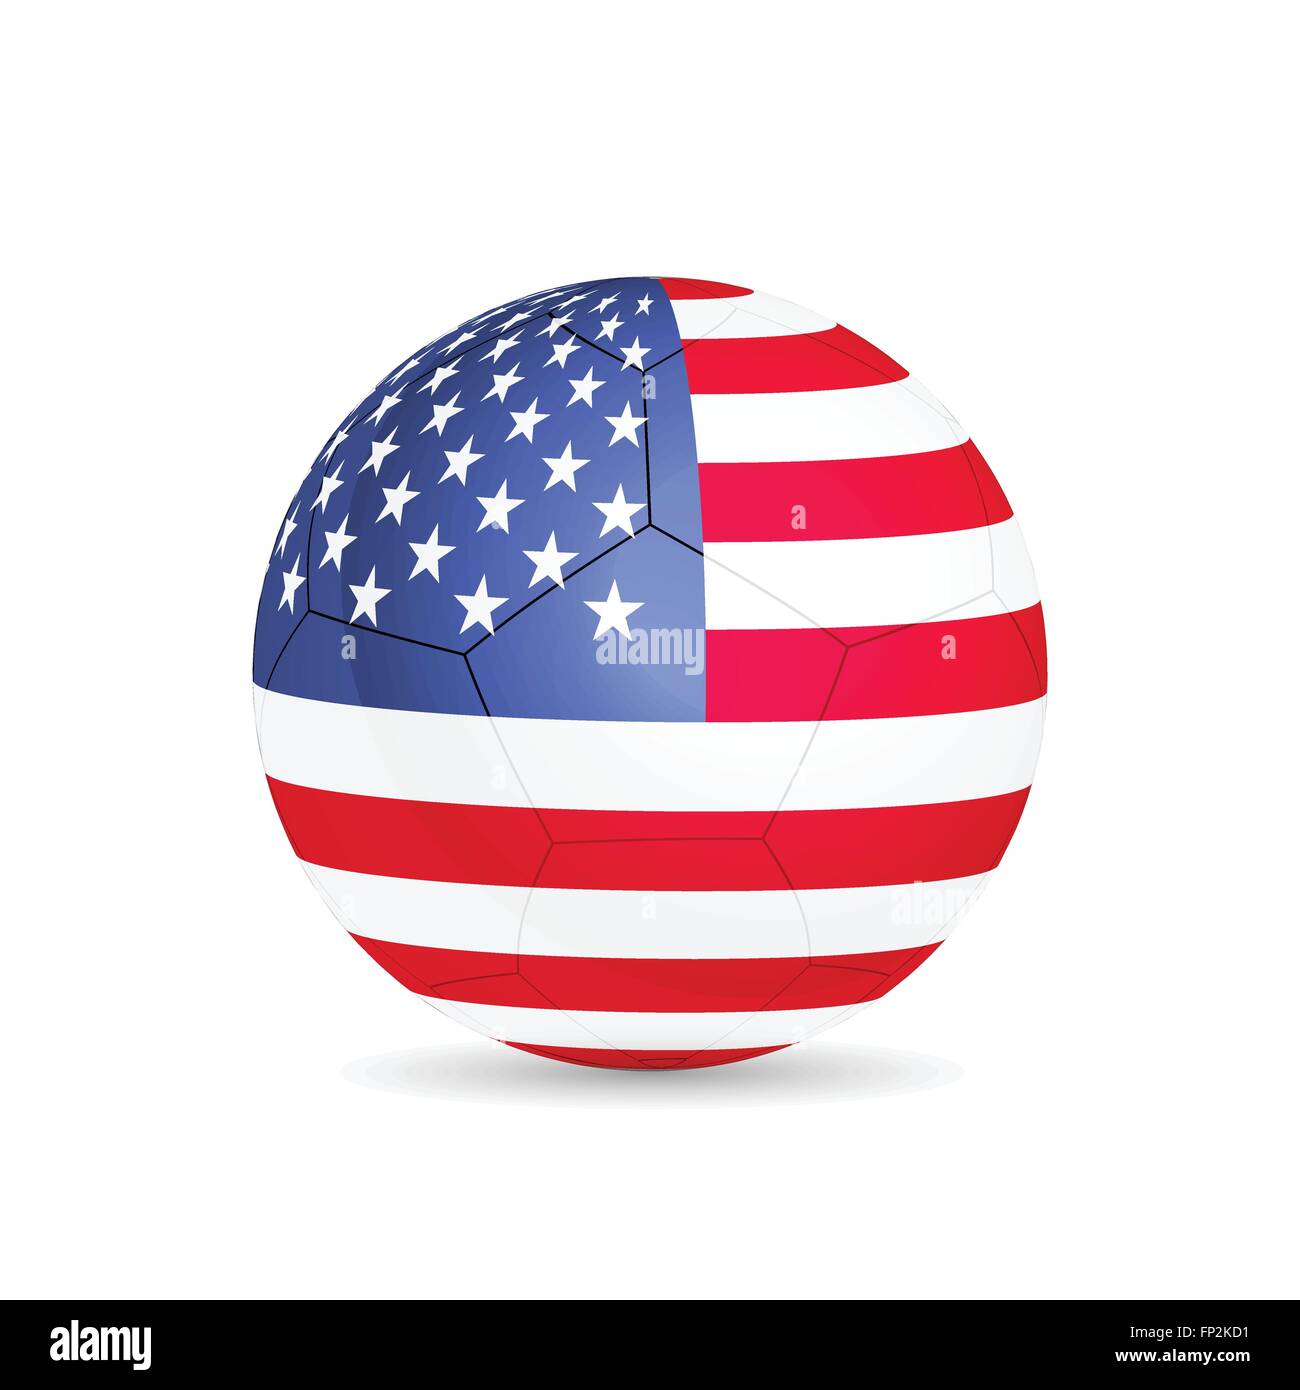 Illustration of a soccer ball with flag from USA isolated on a white background. Stock Vector